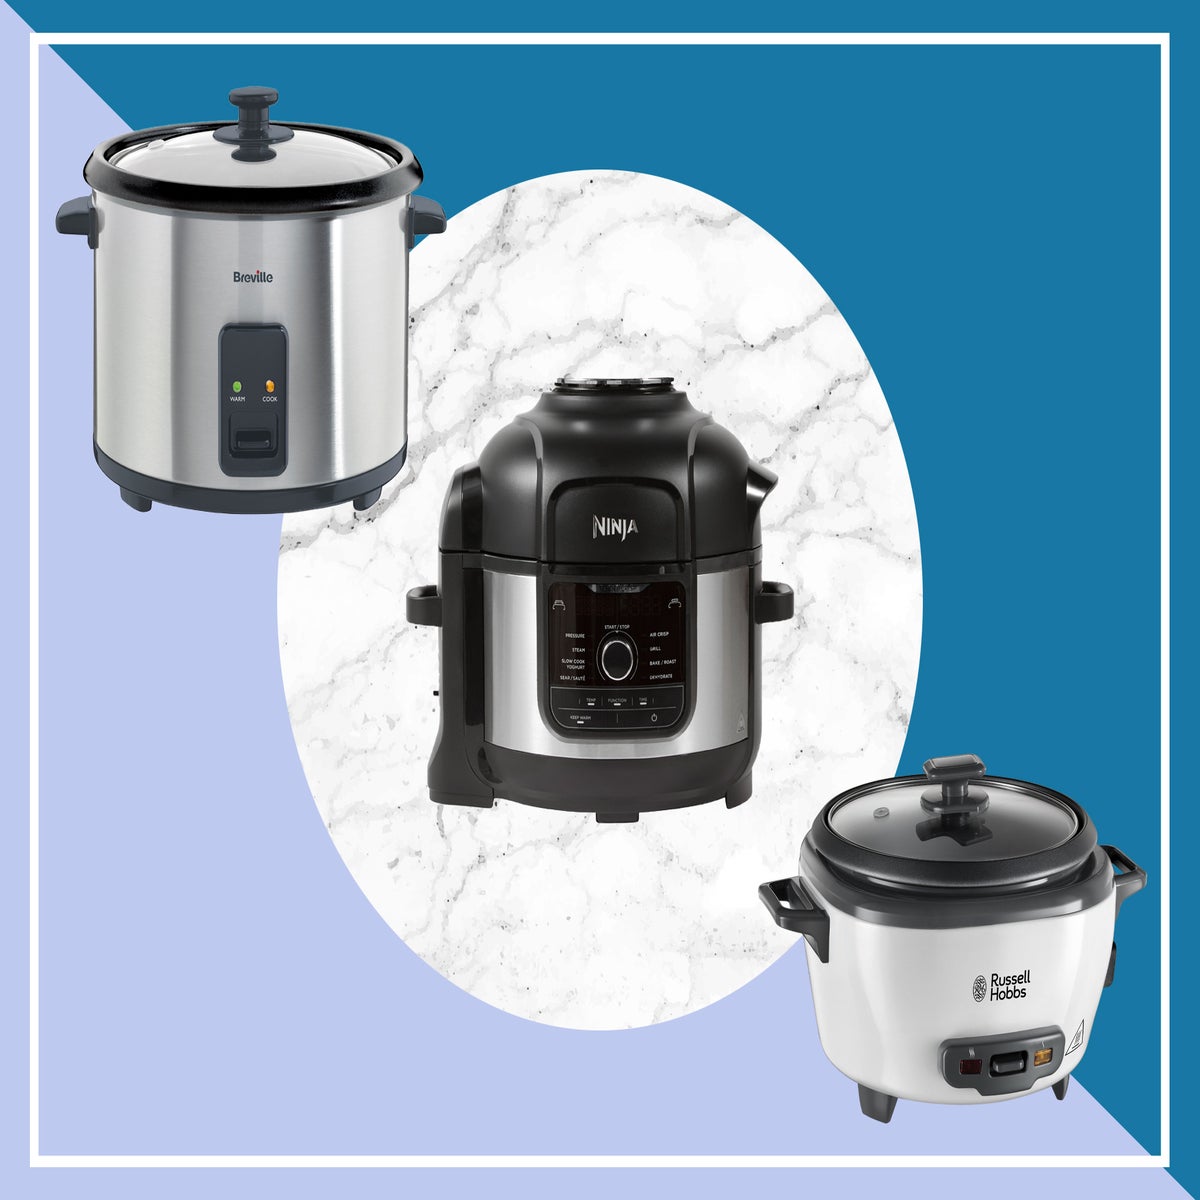 https://static.independent.co.uk/2021/03/08/17/rice%20cookers.jpg?width=1200&height=1200&fit=crop